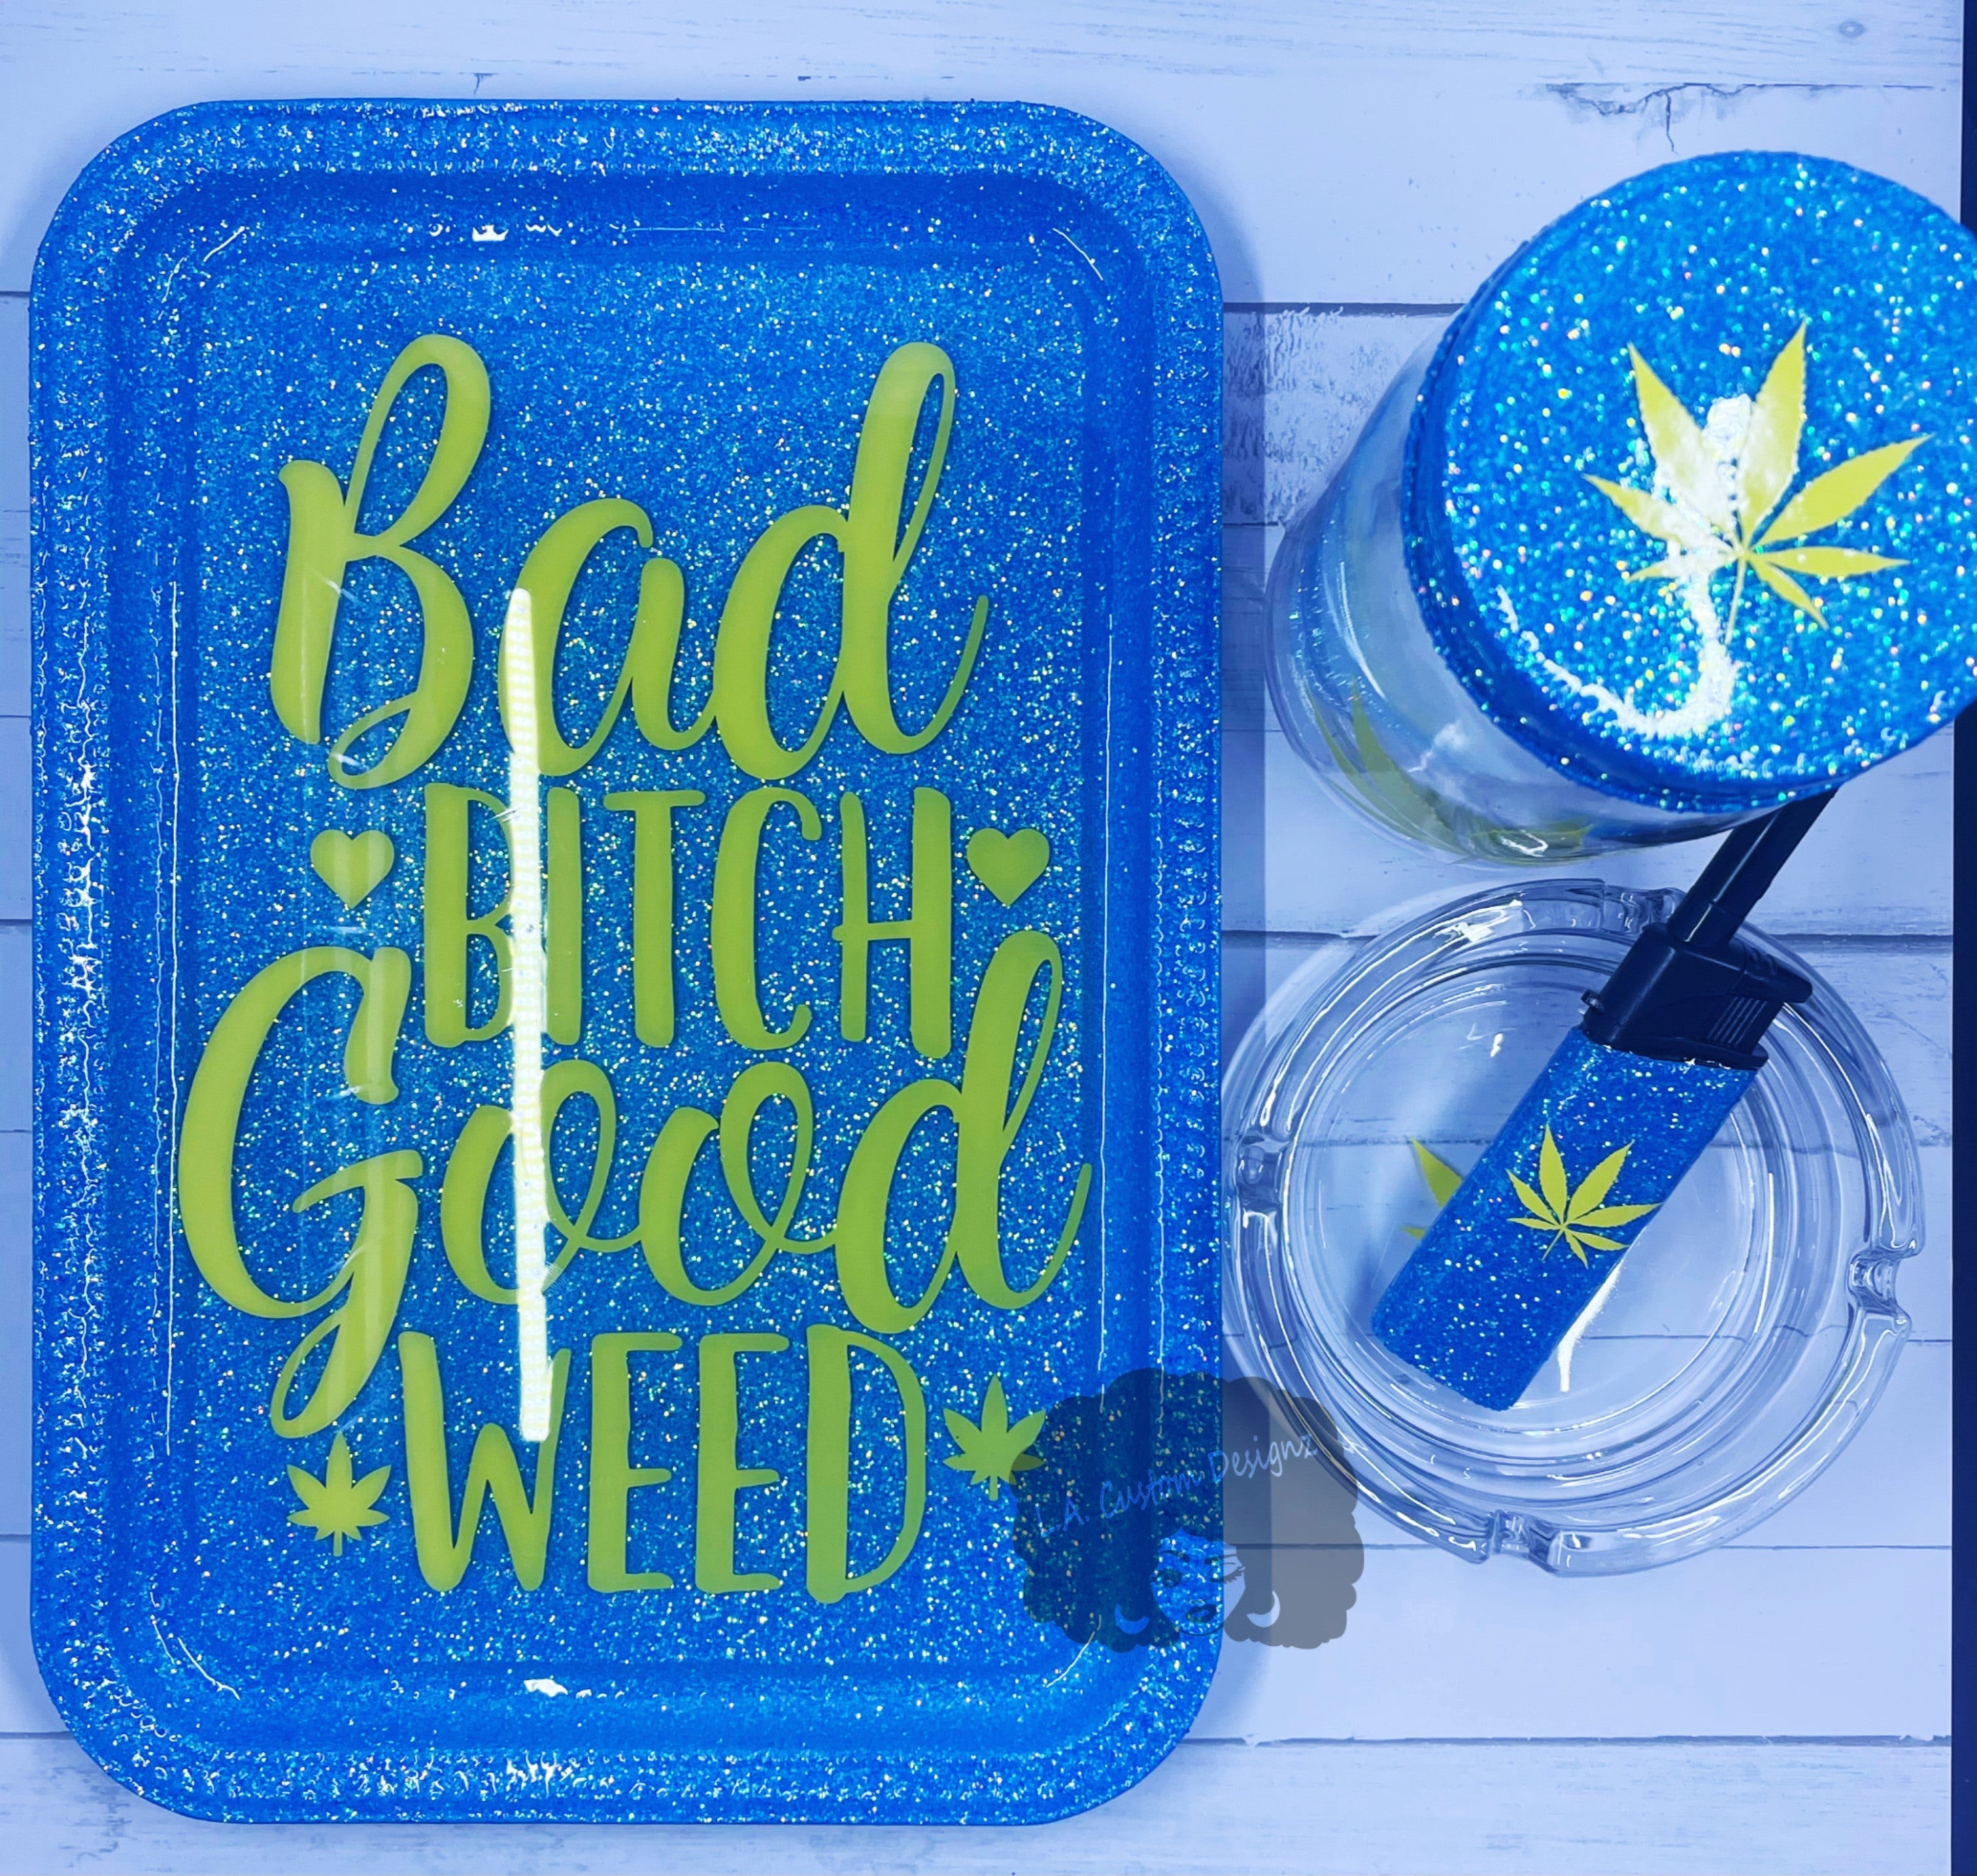 Custom Rolling Trays: Designer Weed Trays For Brands